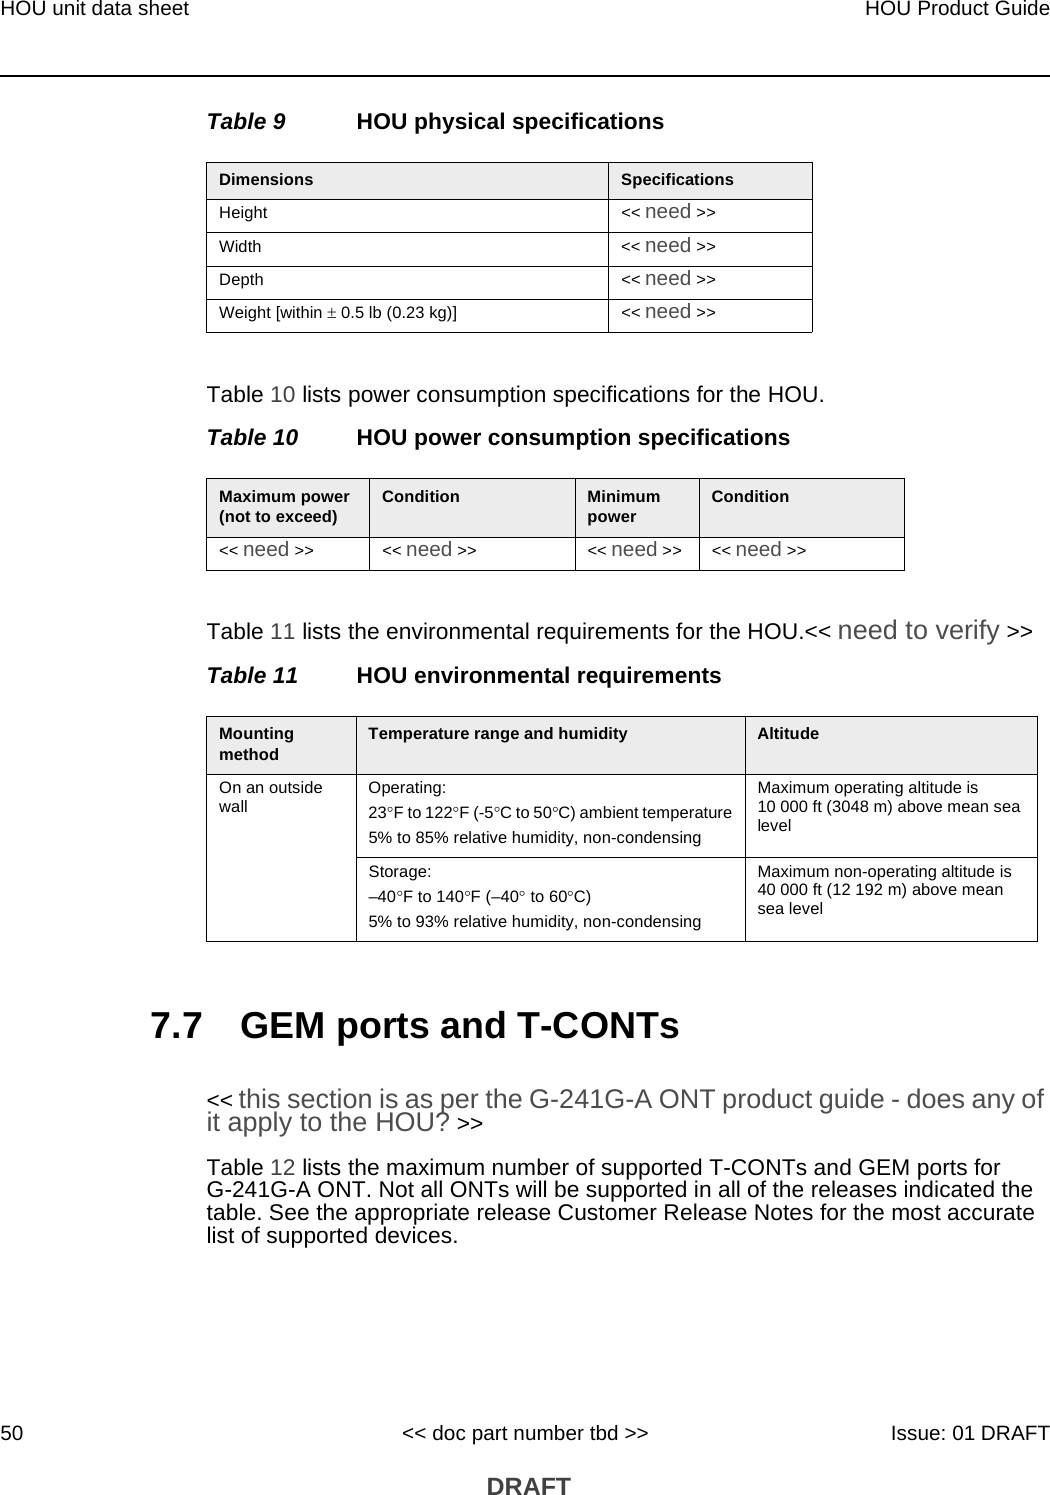 HOU unit data sheet50HOU Product Guide&lt;&lt; doc part number tbd &gt;&gt; Issue: 01 DRAFT DRAFTTable 9 HOU physical specificationsTable 10 lists power consumption specifications for the HOU. Table 10 HOU power consumption specificationsTable 11 lists the environmental requirements for the HOU.&lt;&lt; need to verify &gt;&gt;Table 11 HOU environmental requirements7.7 GEM ports and T-CONTs&lt;&lt; this section is as per the G-241G-A ONT product guide - does any of it apply to the HOU? &gt;&gt;Table 12 lists the maximum number of supported T-CONTs and GEM ports for G-241G-A ONT. Not all ONTs will be supported in all of the releases indicated the table. See the appropriate release Customer Release Notes for the most accurate list of supported devices.Dimensions SpecificationsHeight &lt;&lt; need &gt;&gt;Width &lt;&lt; need &gt;&gt;Depth &lt;&lt; need &gt;&gt;Weight [within  0.5 lb (0.23 kg)] &lt;&lt; need &gt;&gt;Maximum power (not to exceed) Condition Minimum power Condition&lt;&lt; need &gt;&gt; &lt;&lt; need &gt;&gt; &lt;&lt; need &gt;&gt; &lt;&lt; need &gt;&gt;Mounting method Temperature range and humidity AltitudeOn an outside wall Operating:23F to 122F (-5C to 50C) ambient temperature5% to 85% relative humidity, non-condensingMaximum operating altitude is 10 000 ft (3048 m) above mean sea levelStorage:–40F to 140F (–40 to 60C) 5% to 93% relative humidity, non-condensingMaximum non-operating altitude is 40 000 ft (12 192 m) above mean sea level 